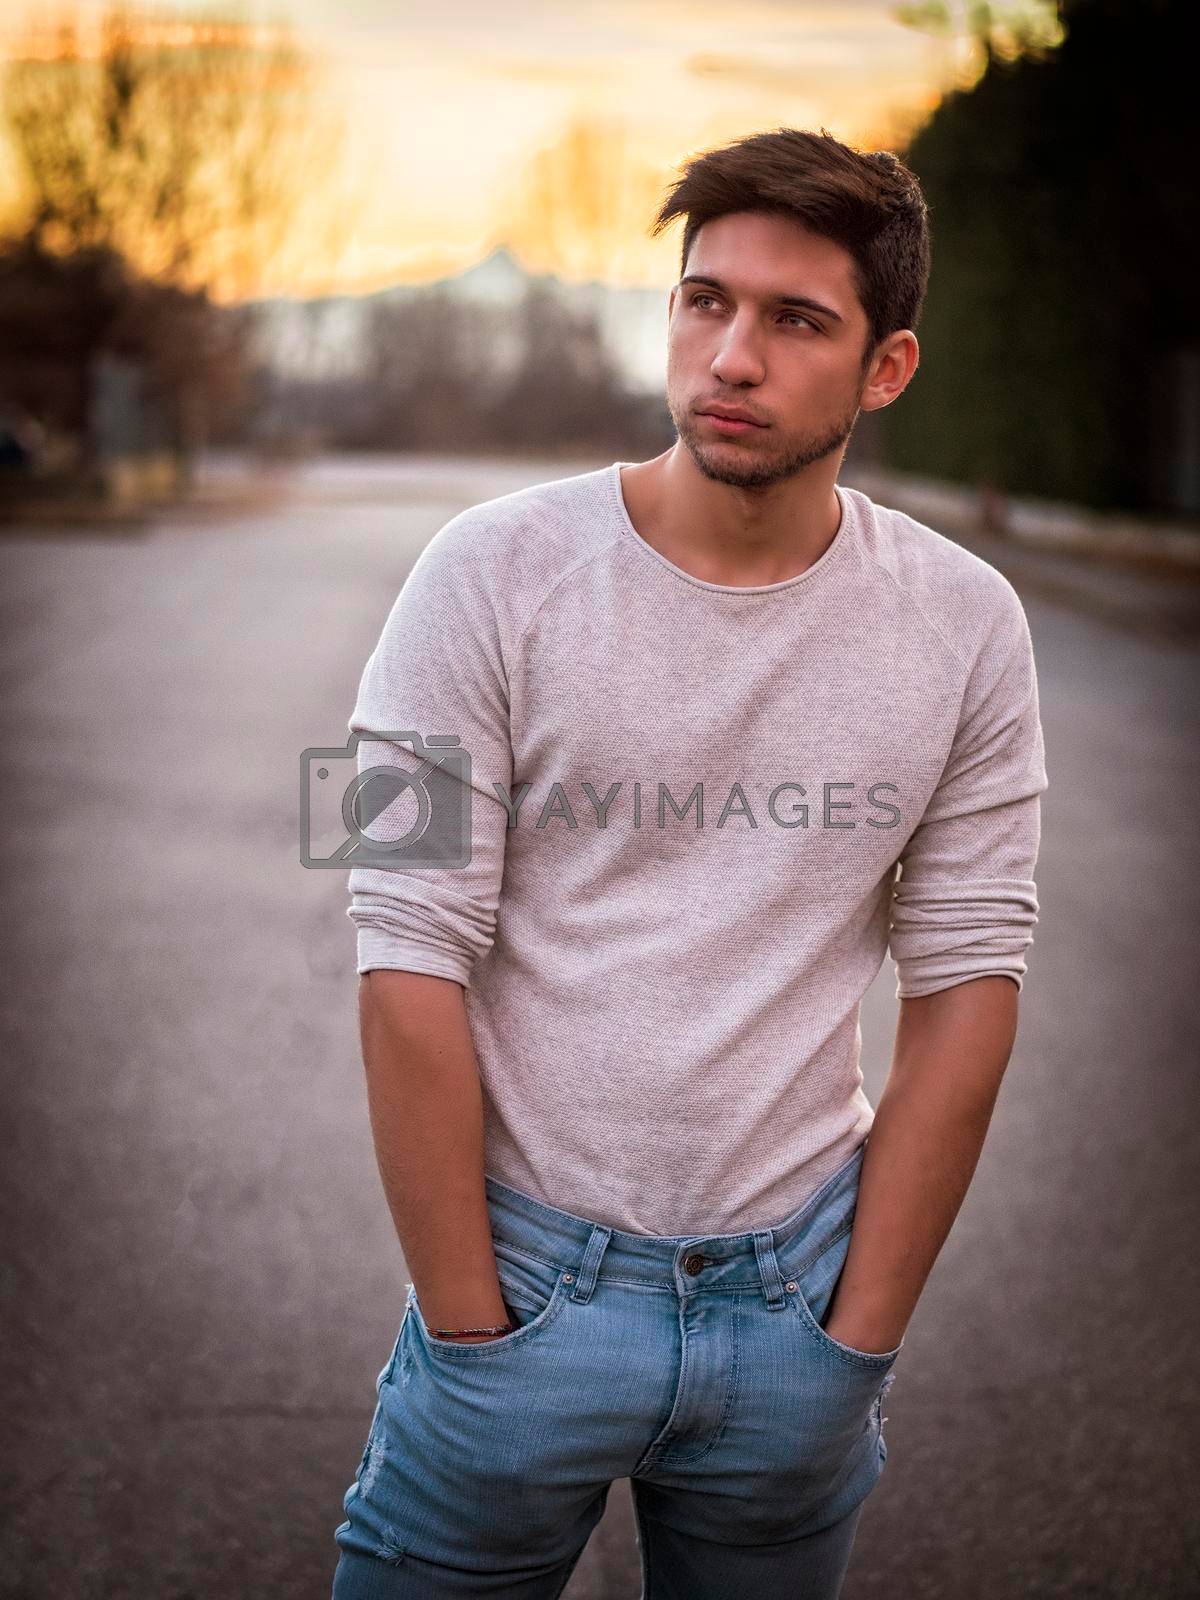 Royalty free image of Handsome young man in white sweater outdoor in street by artofphoto